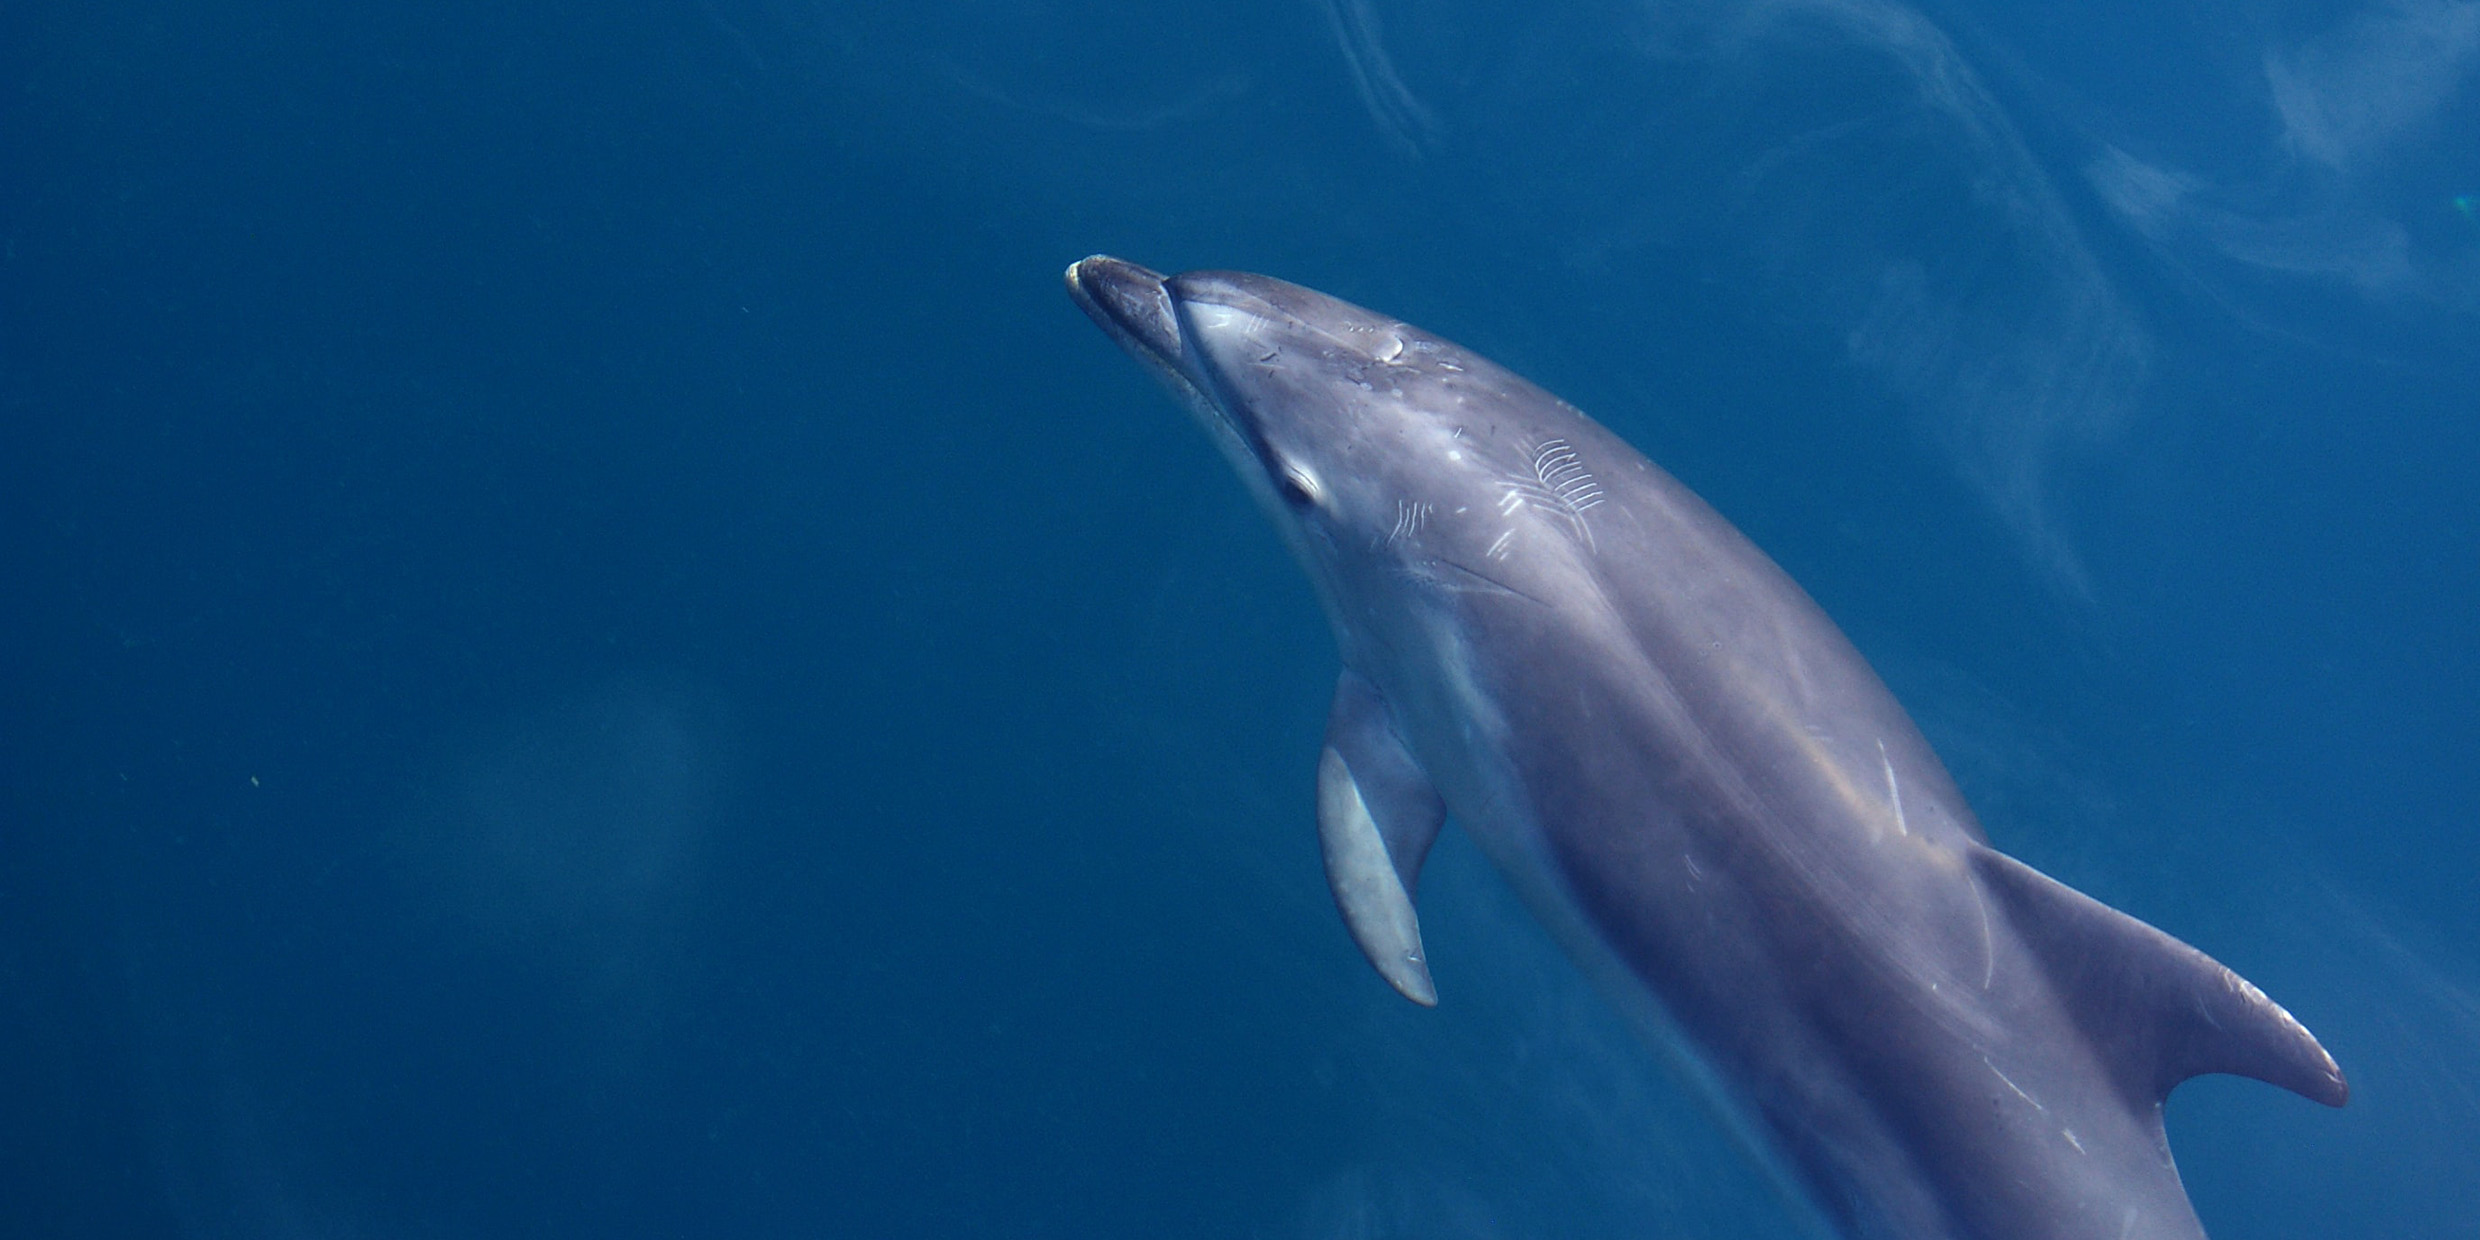 Image of a swimming dolphin